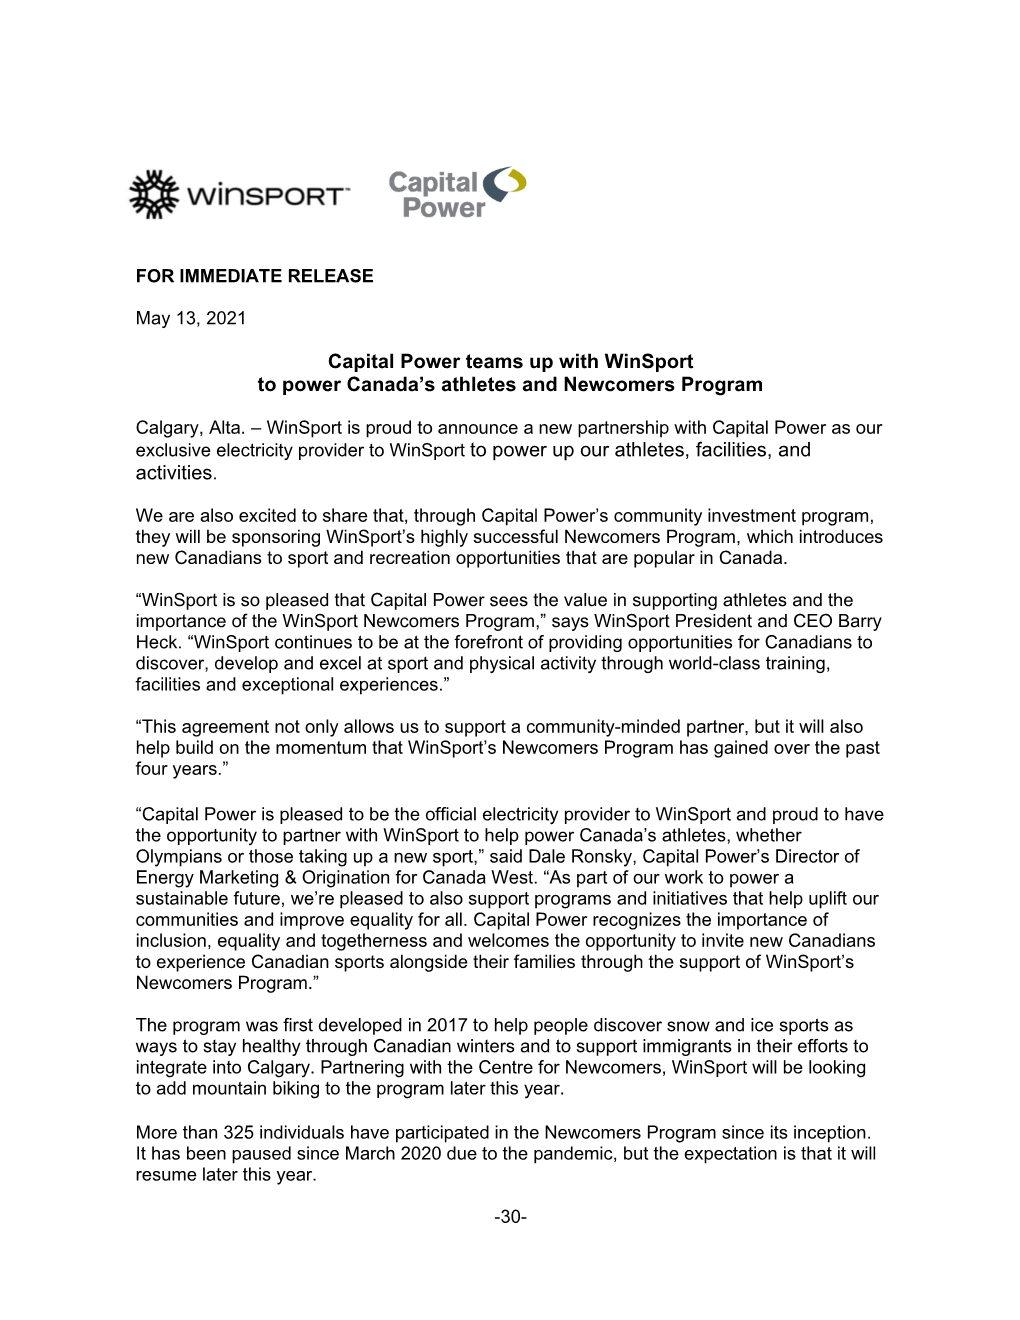 Capital Power Teams up with Winsport to Power Canada's Athletes And